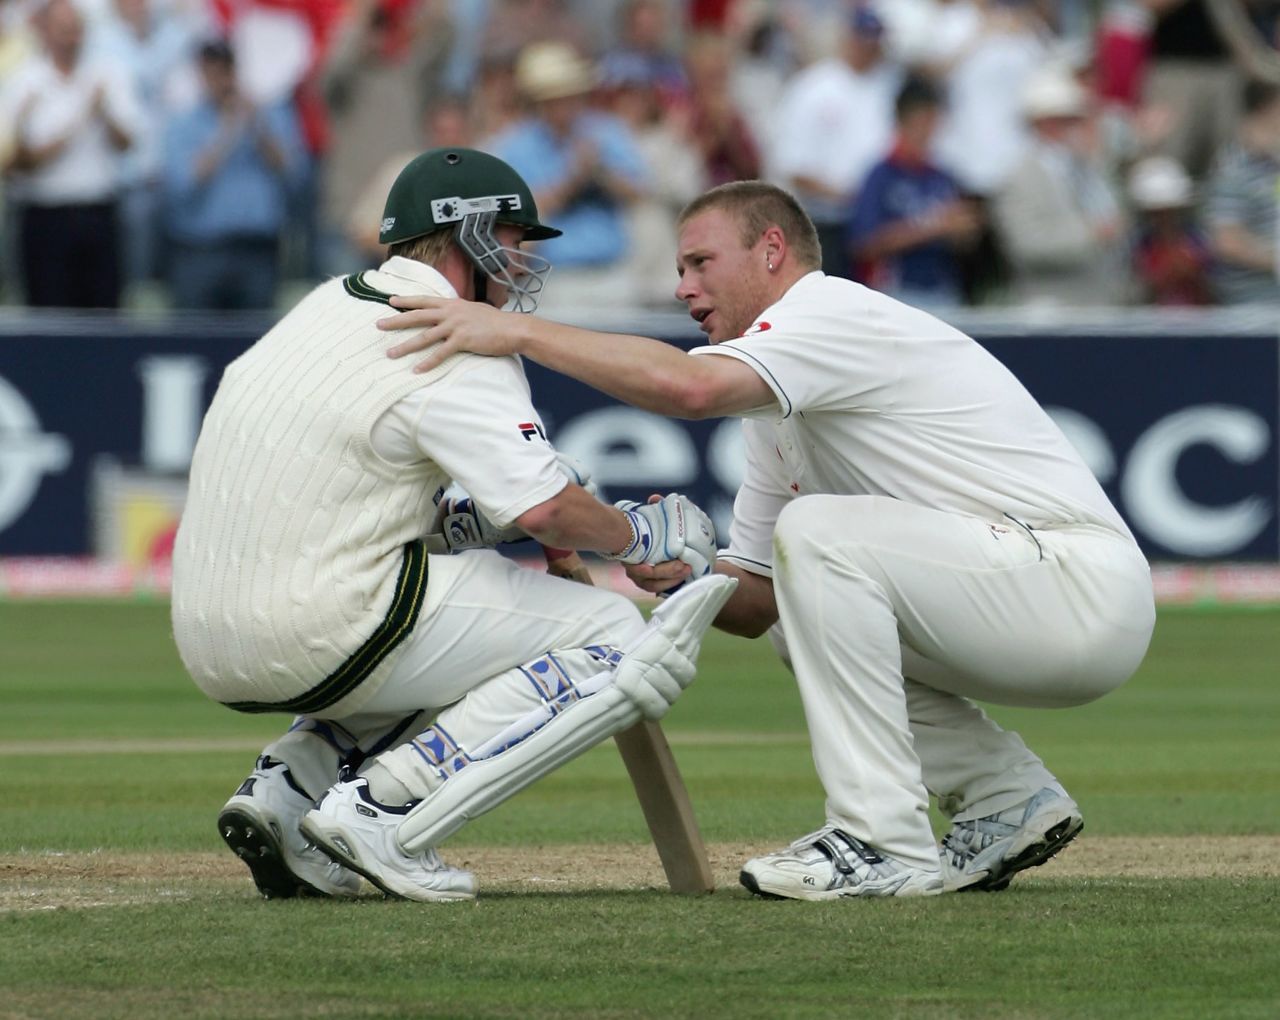 Friends after the battle: England all-rounder Flintoff consoles Lee after Australia lost the Second Ashes Test match by just two runs in 2005.